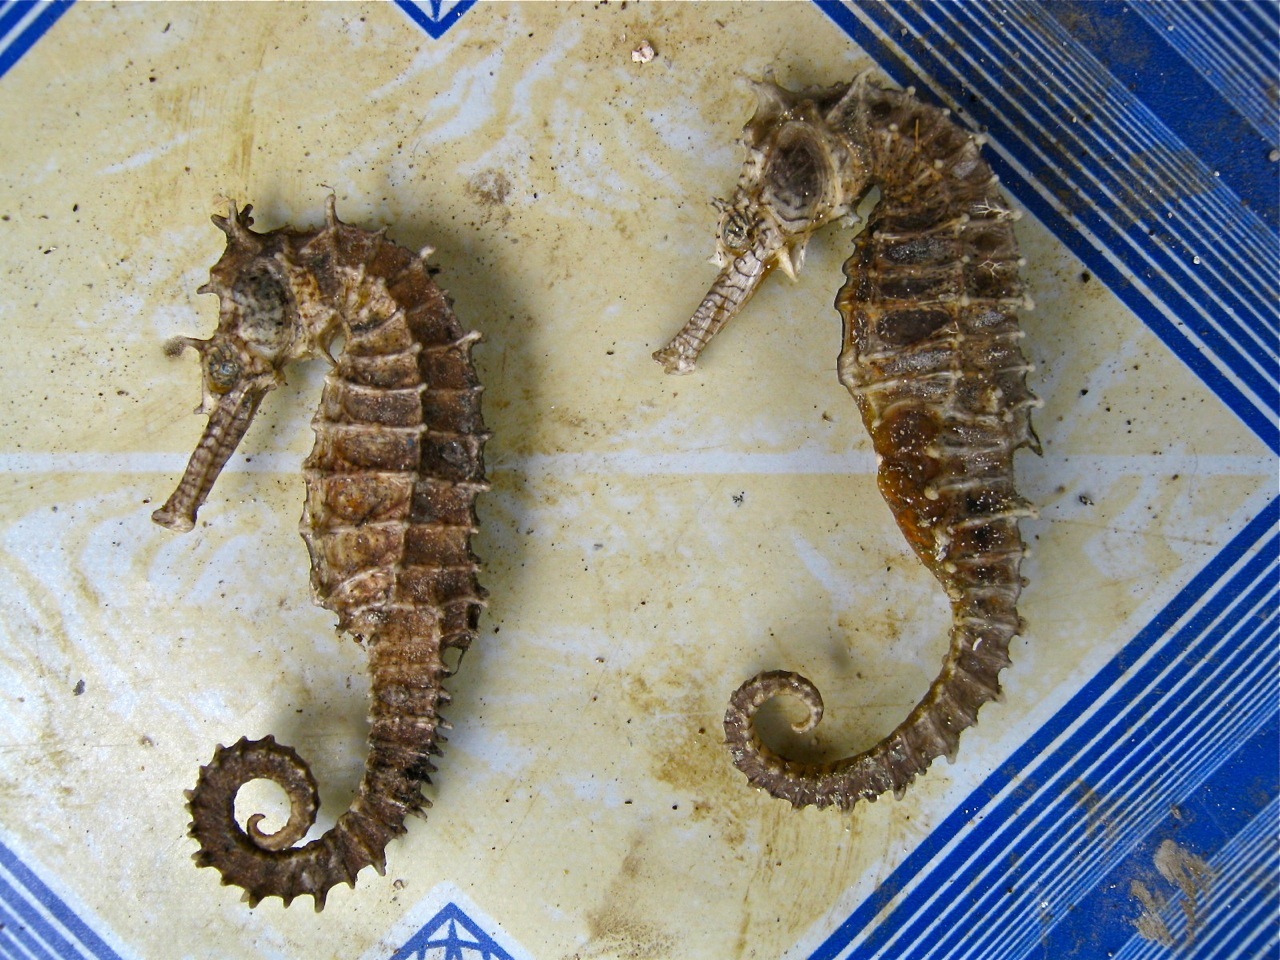 "Retired No Way" "Dried Seahorses for export to China"